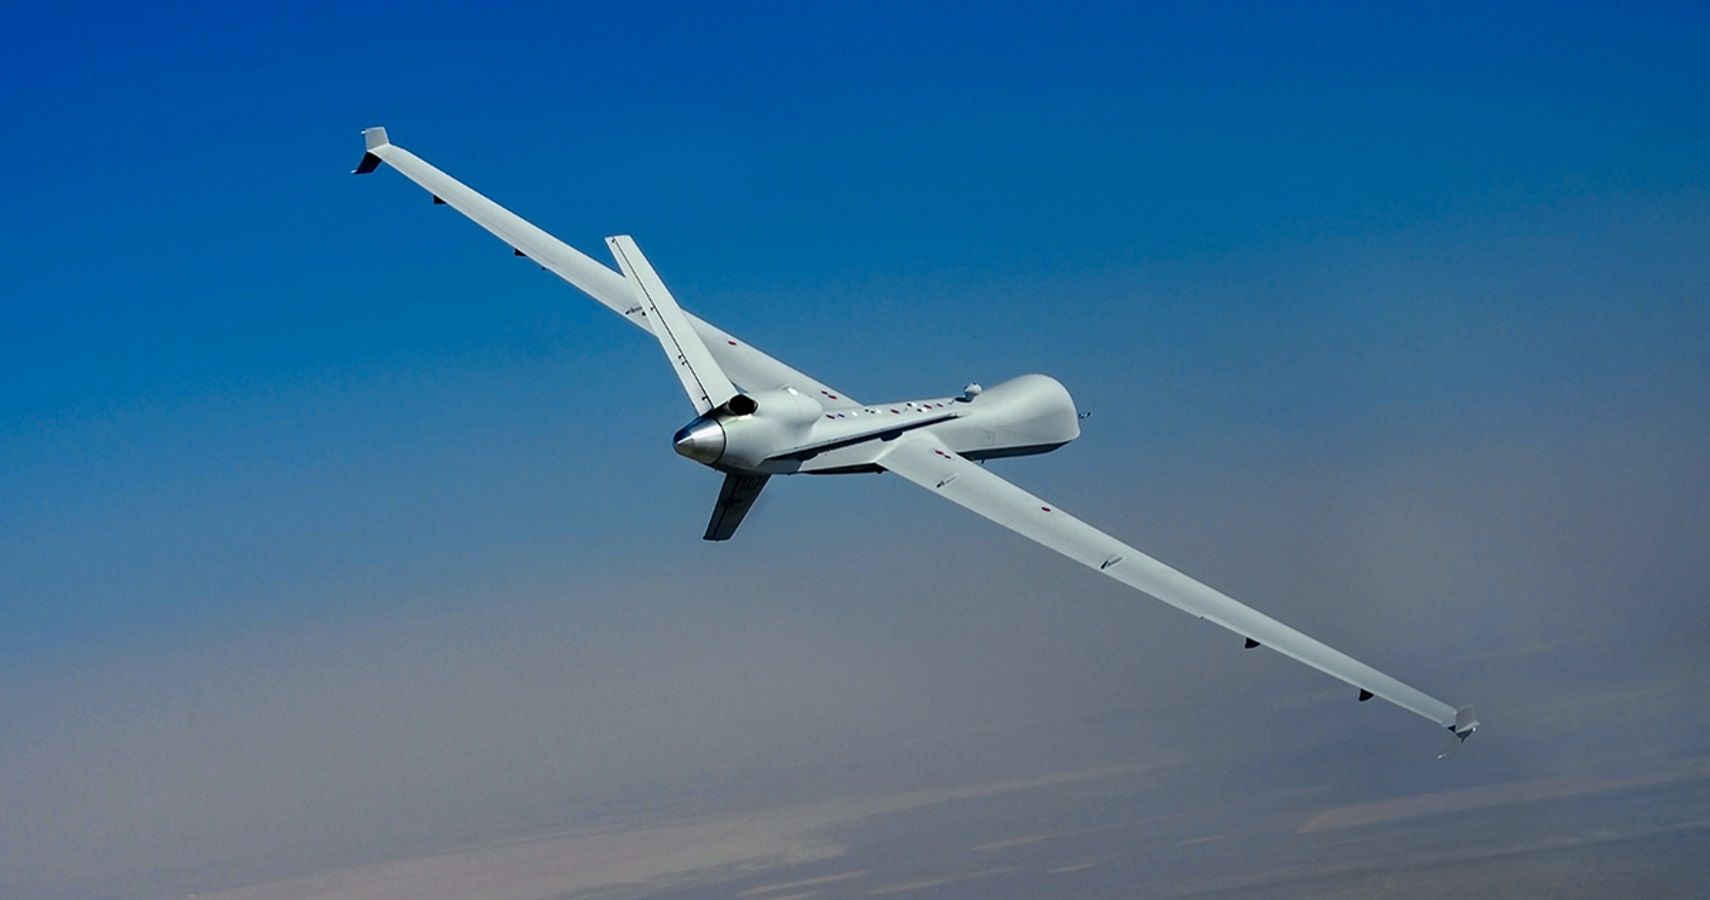 USAF’s MQ-9A Reaper Getting Autoland And Takeoff Capability In 2022